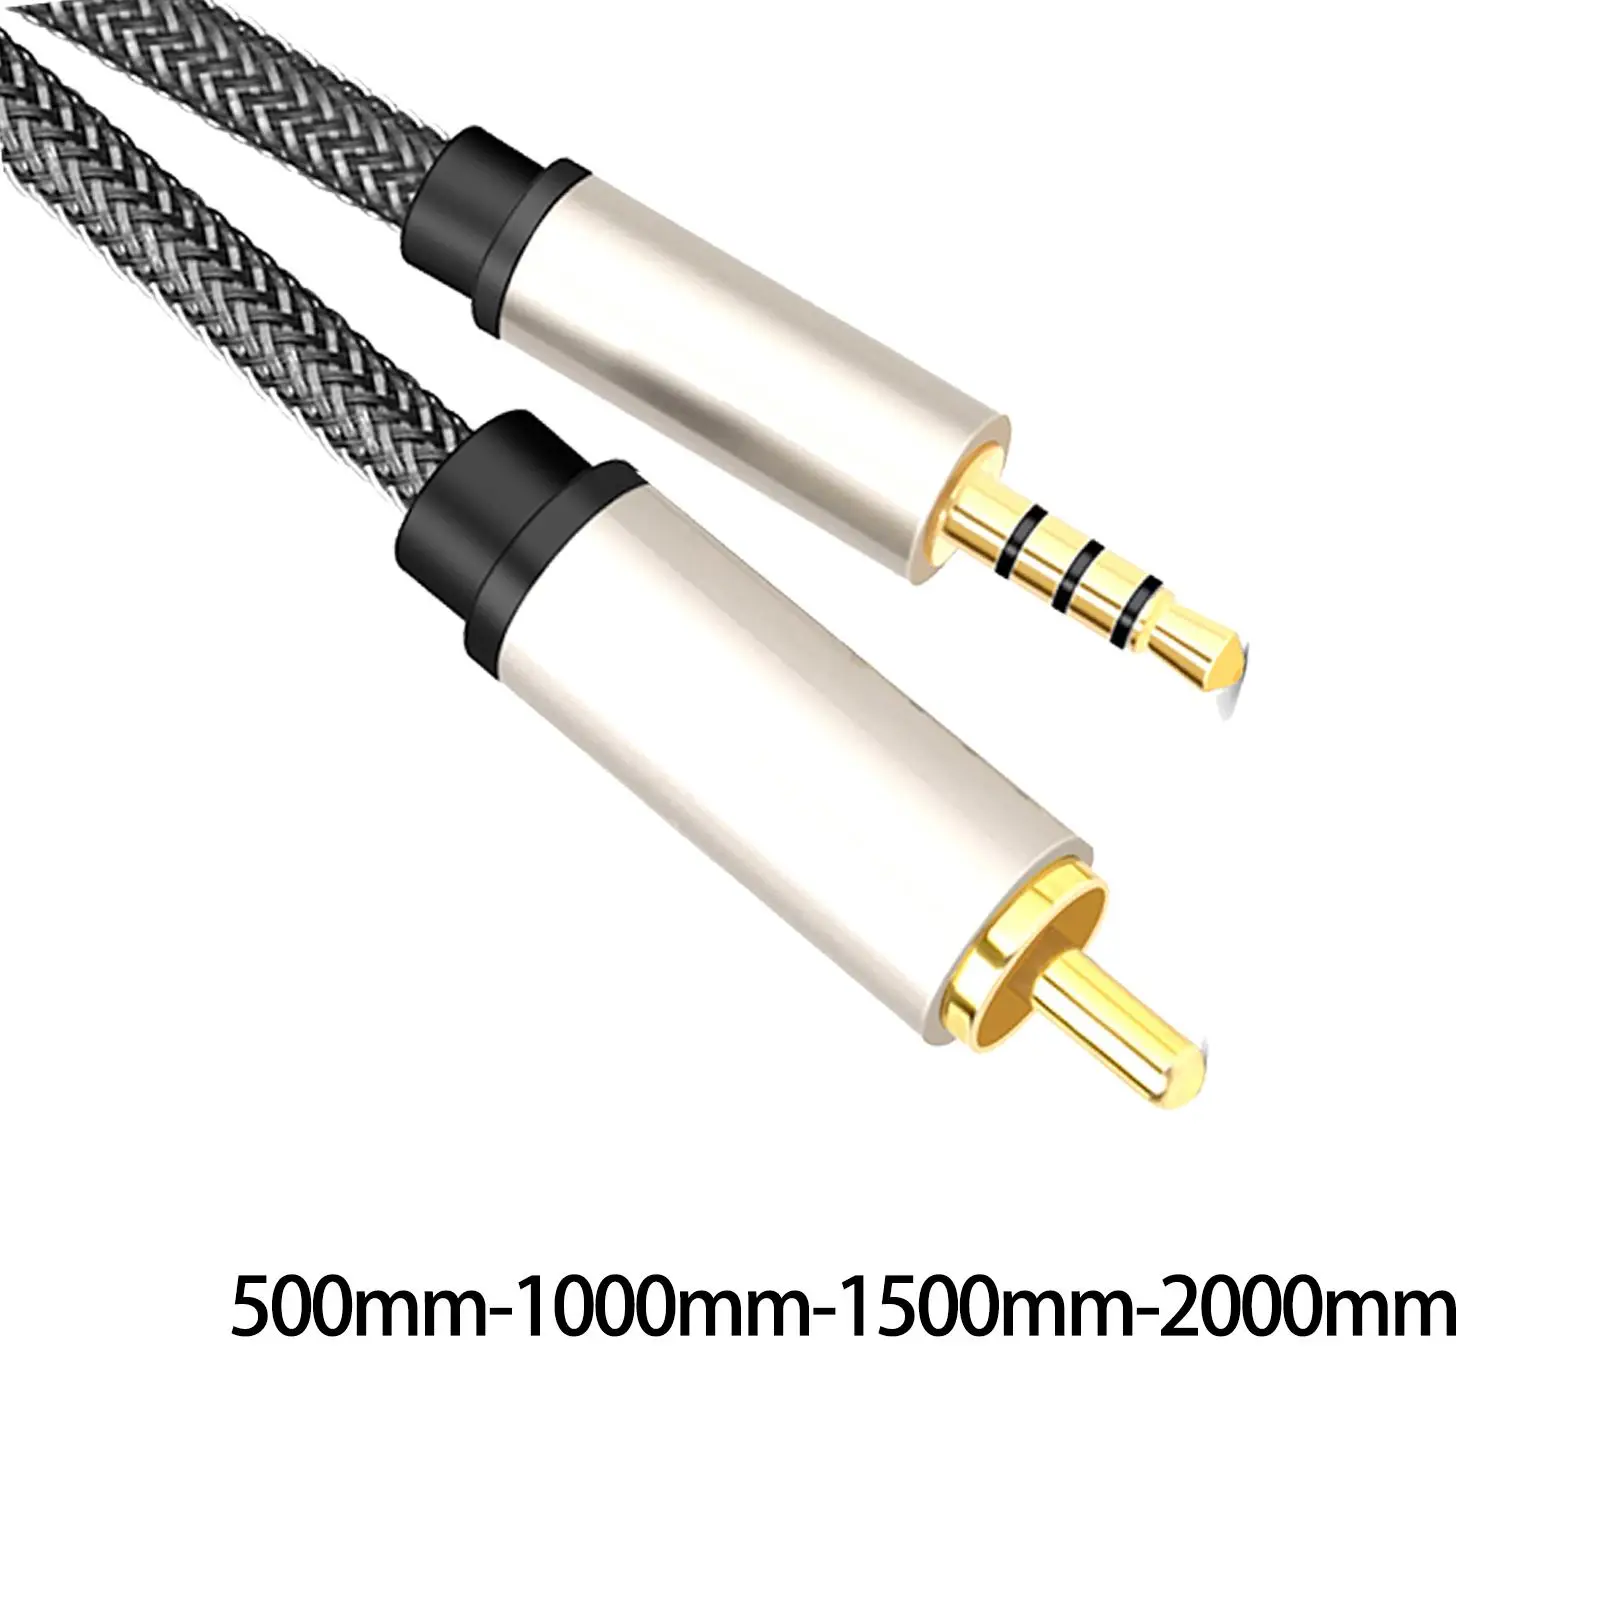 Coaxial Audio Video Cable RCA to 3.5mm Jack Male Auxiliary Input Adapter Wire Coaxial Cable for HDTV Speaker Amplifier Soundbar